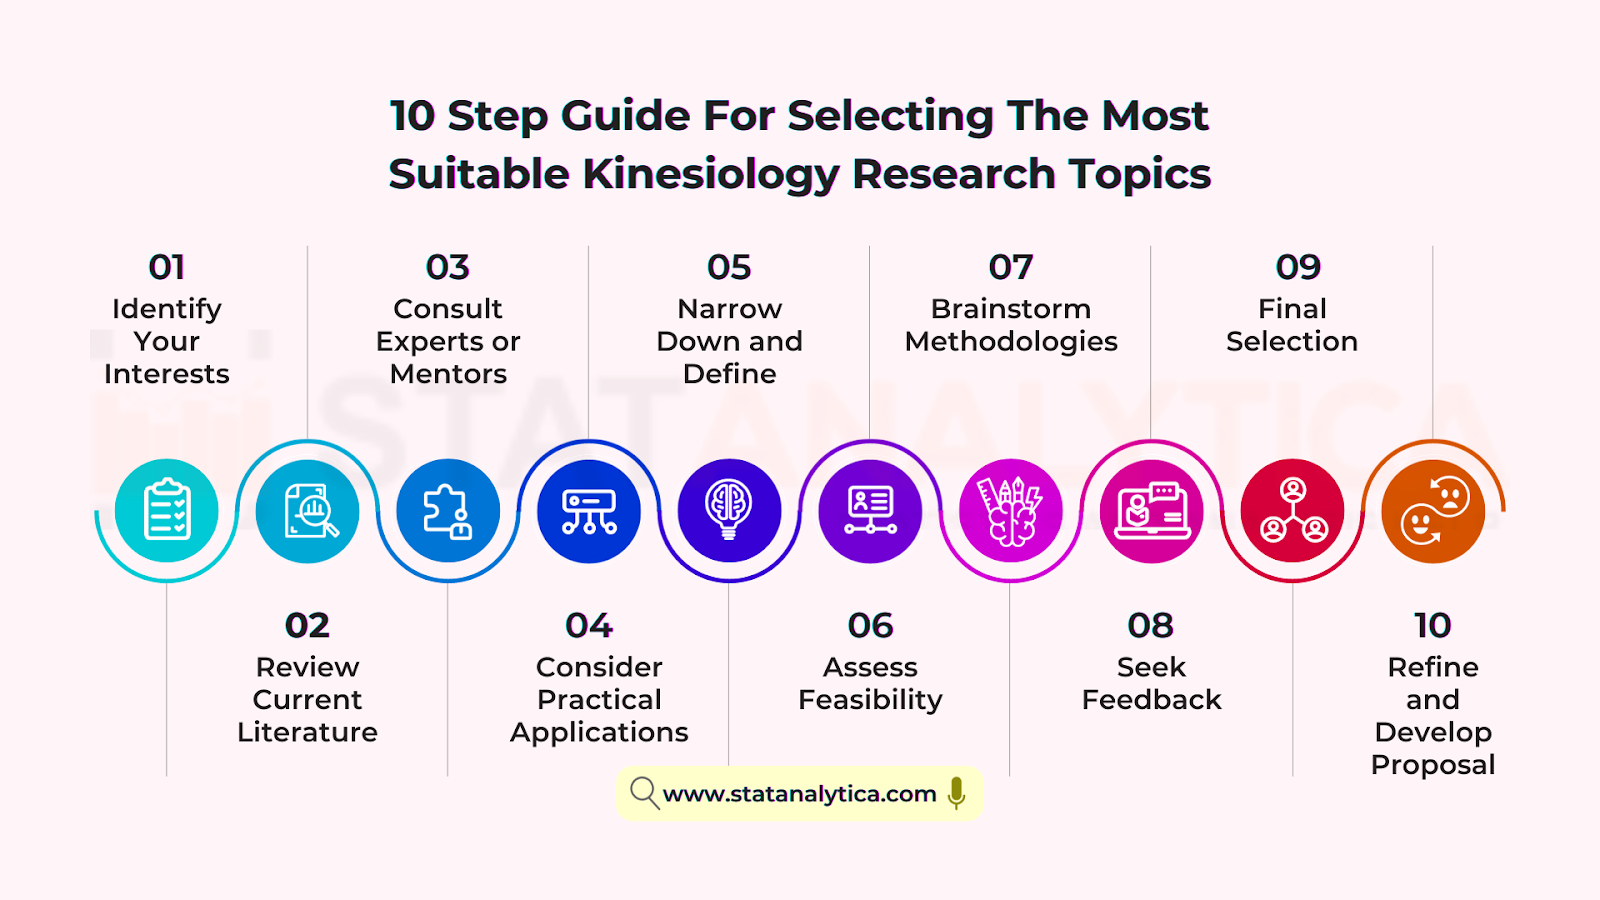 research topics about kinesiology